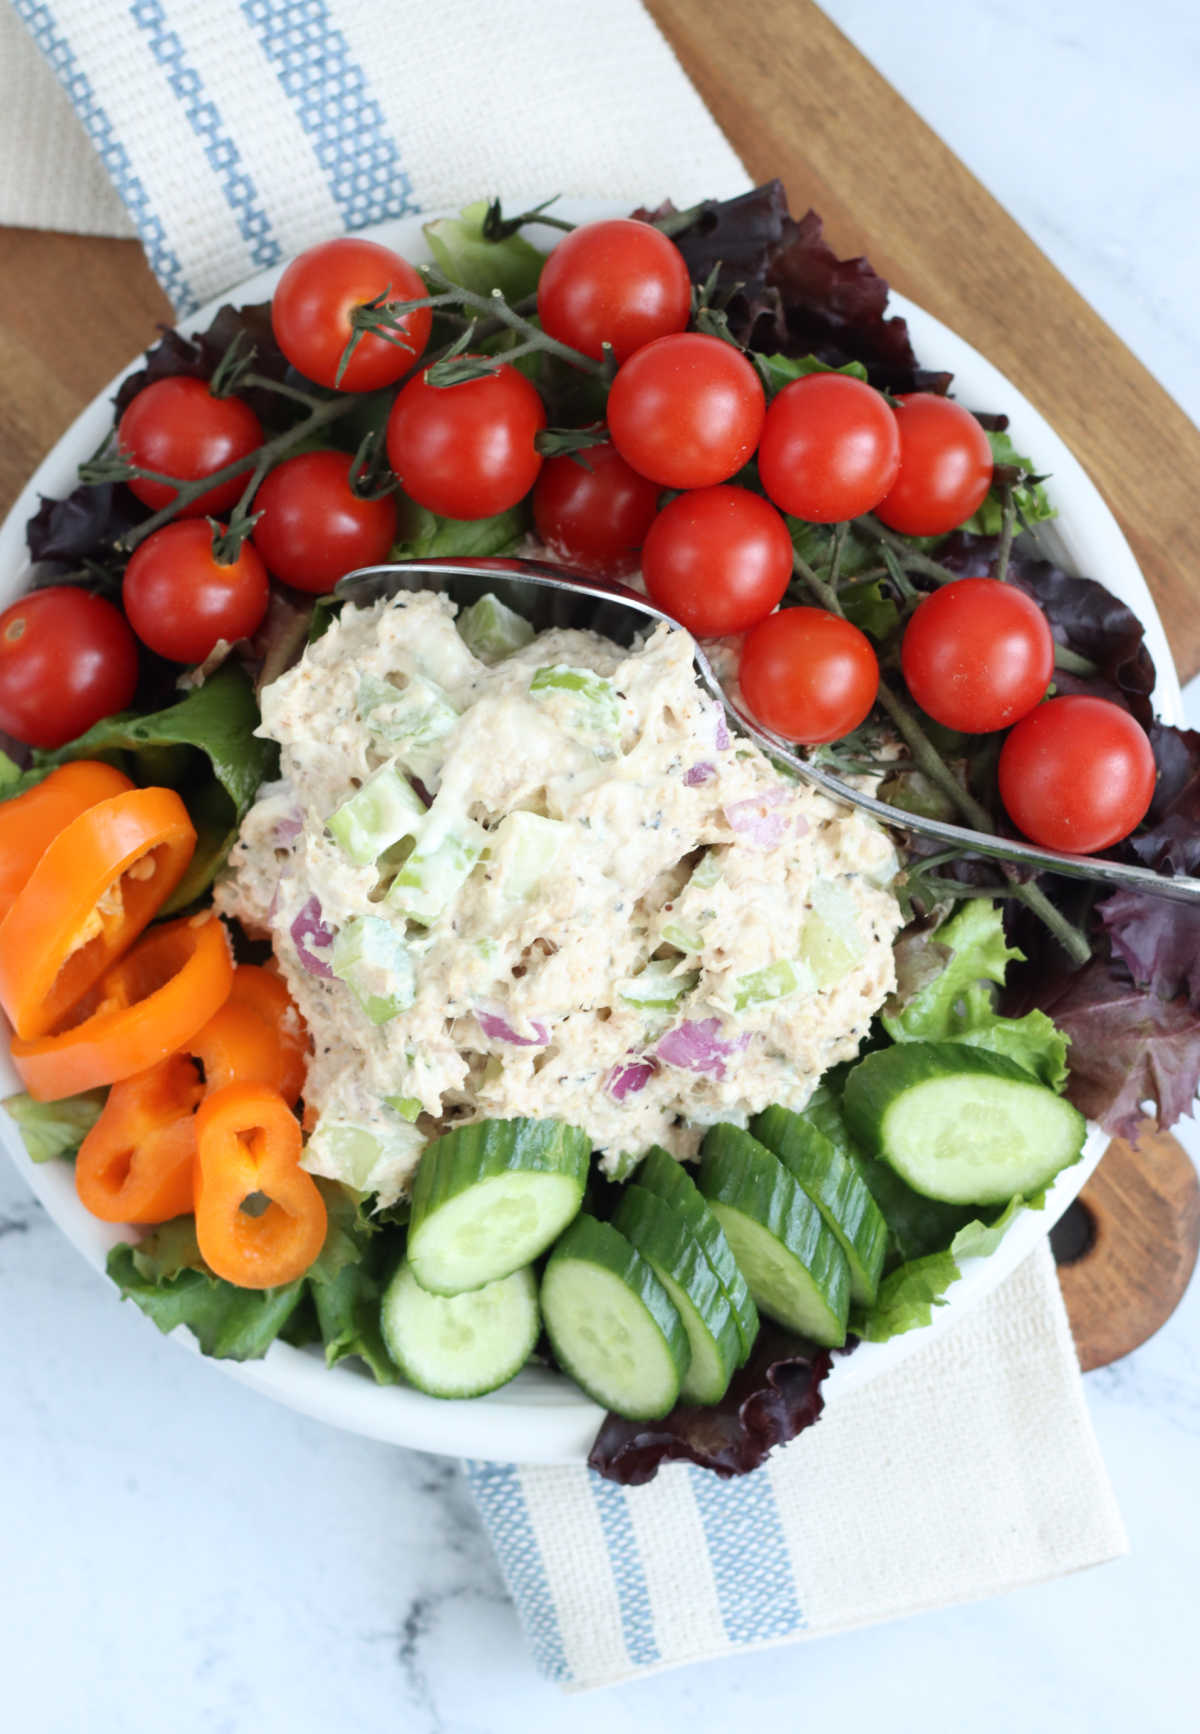 Scoop of tuna salad on small plate with cherry tomatoes, sliced cucumber, bell pepper and greens.